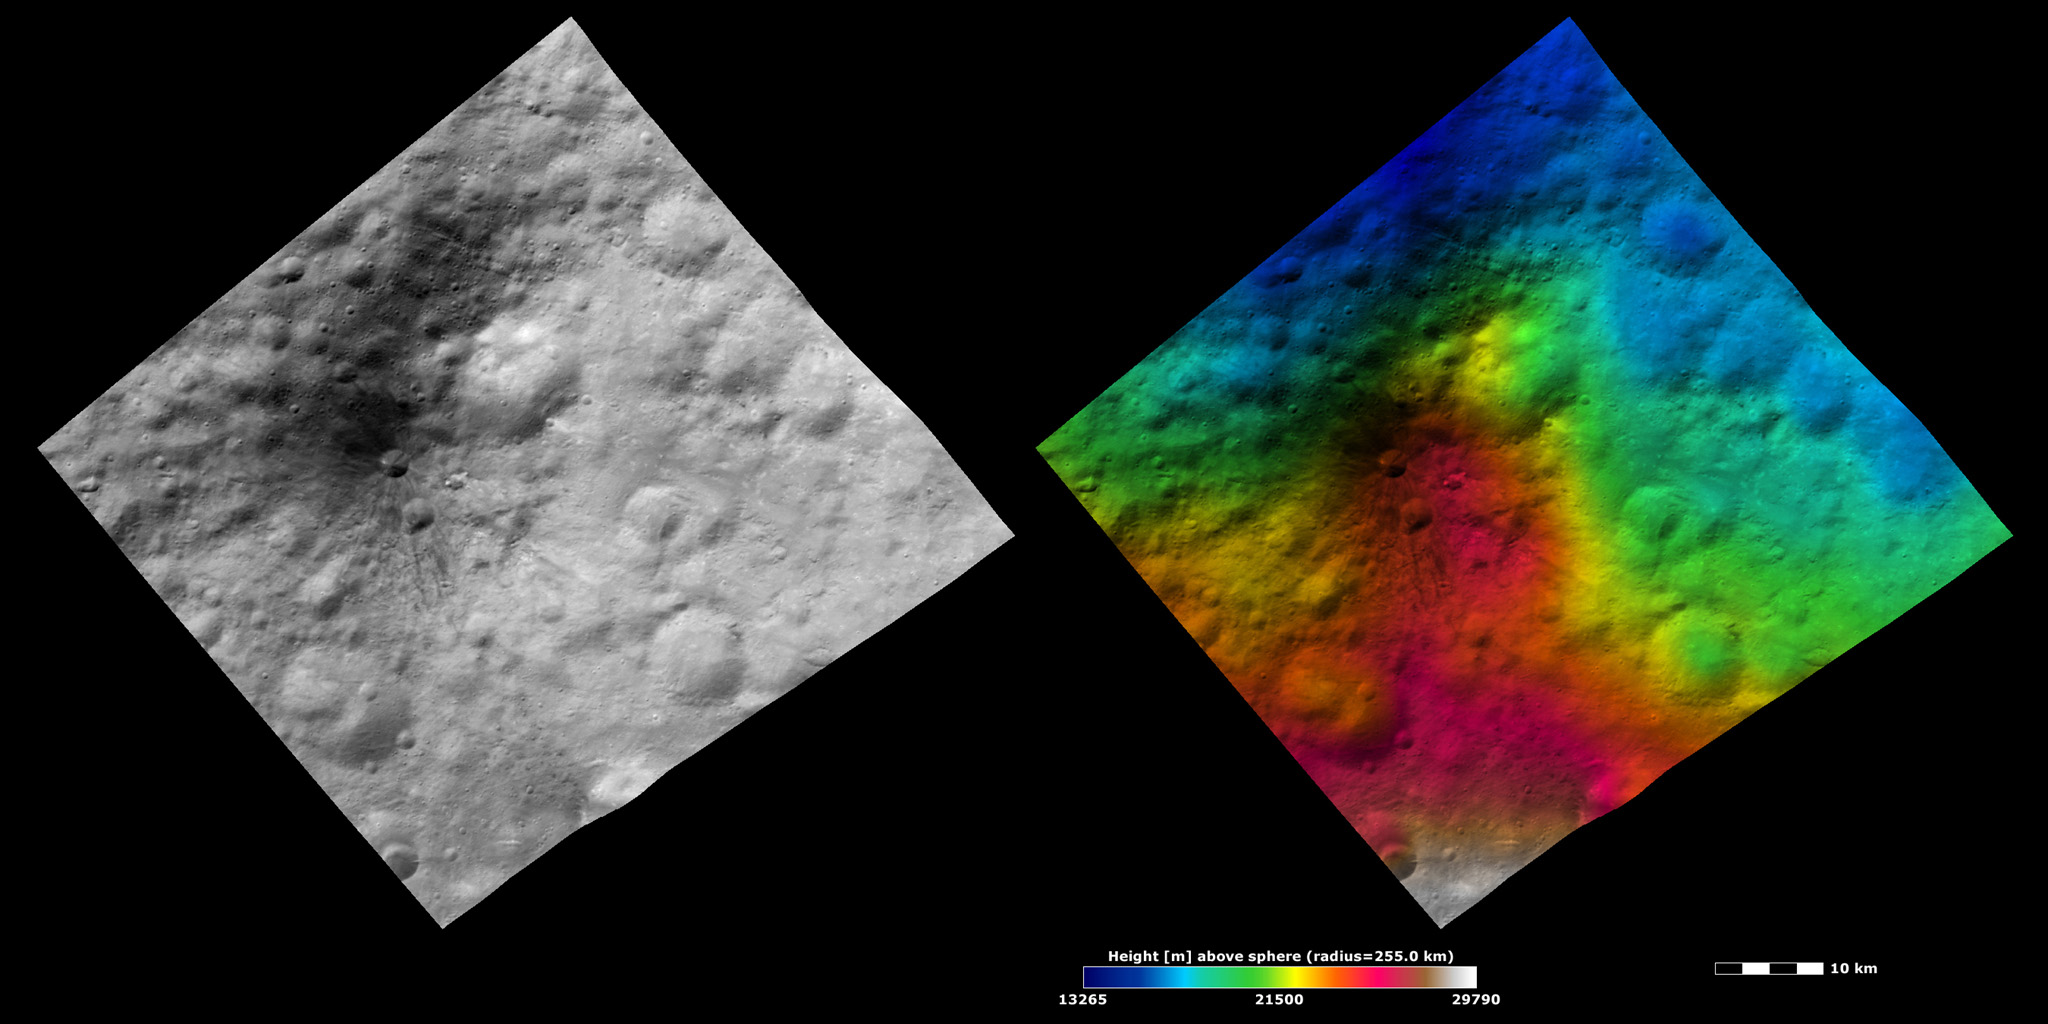 Brightness and Topography Images of a Dark Hill